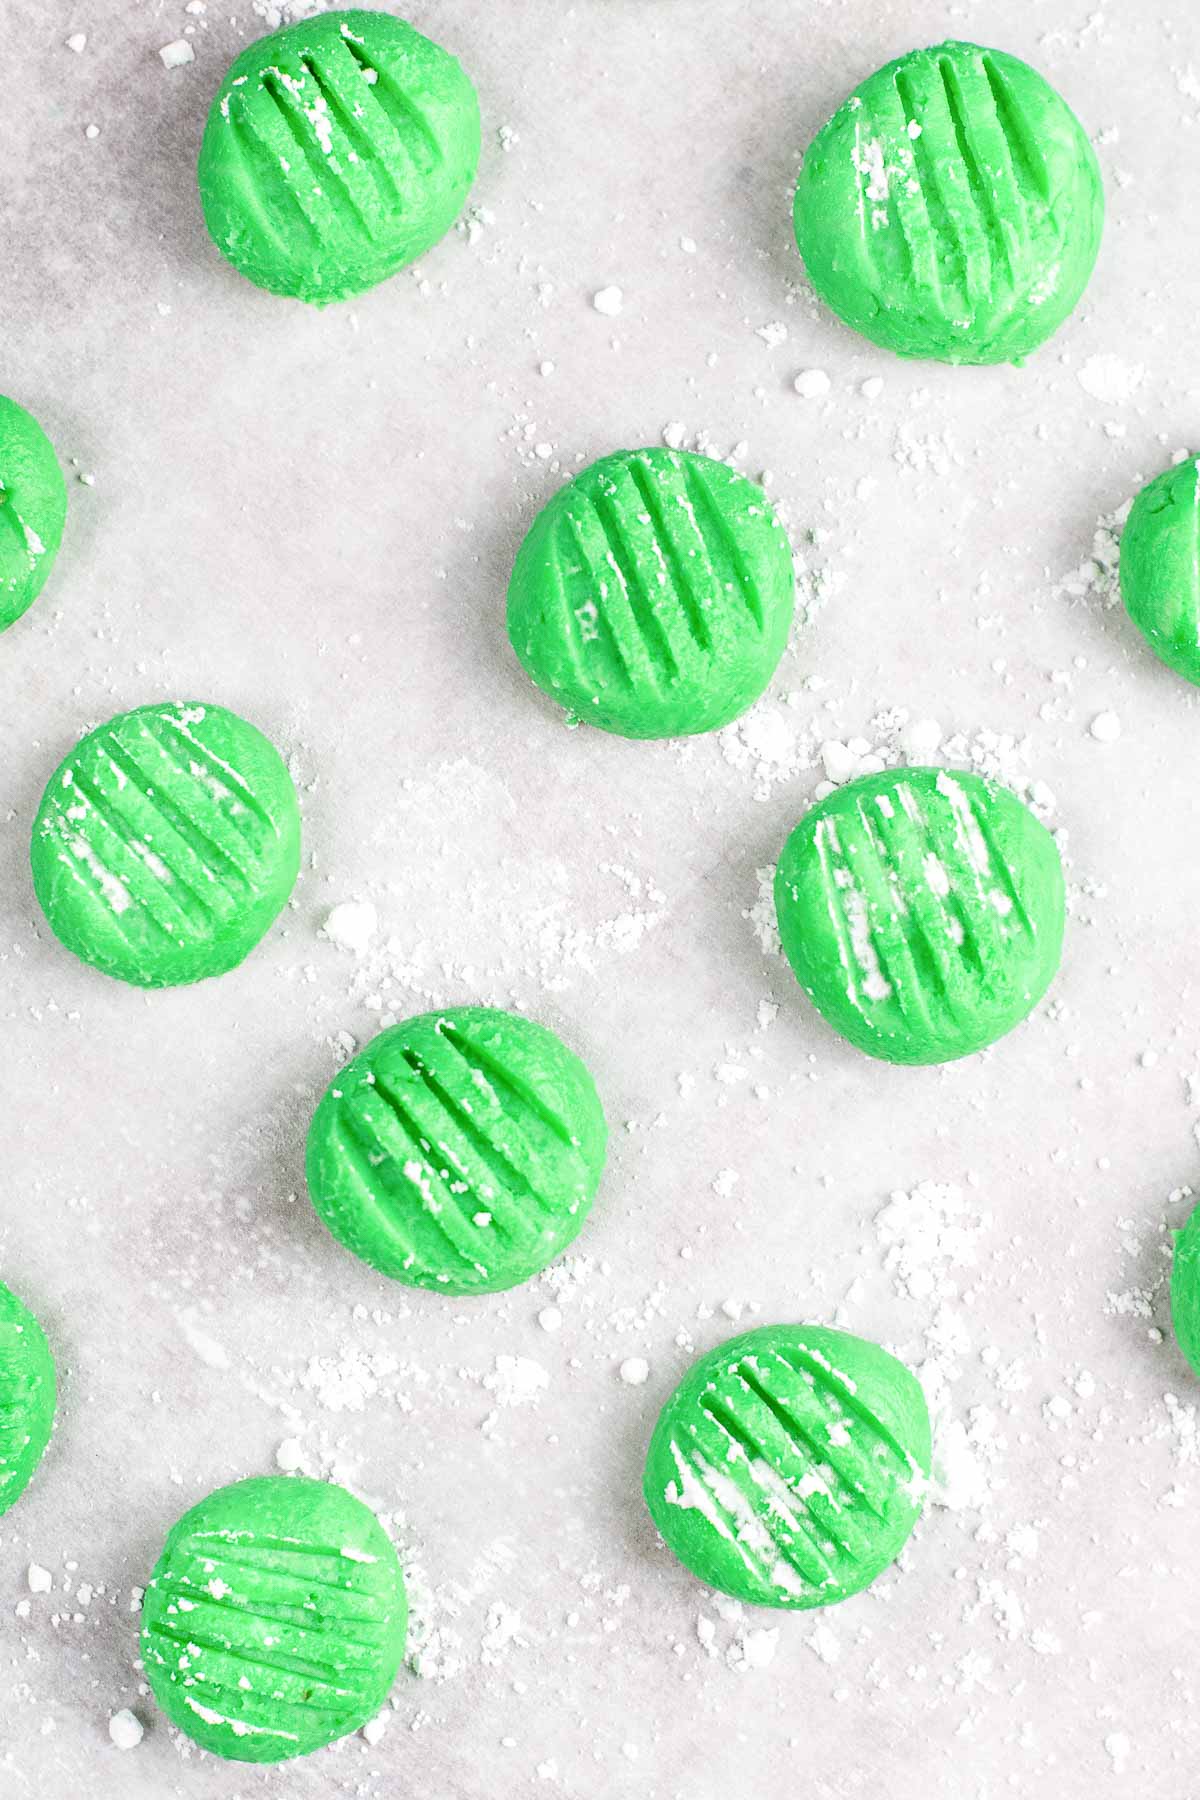 several green cream cheese mints on white parchment paper.